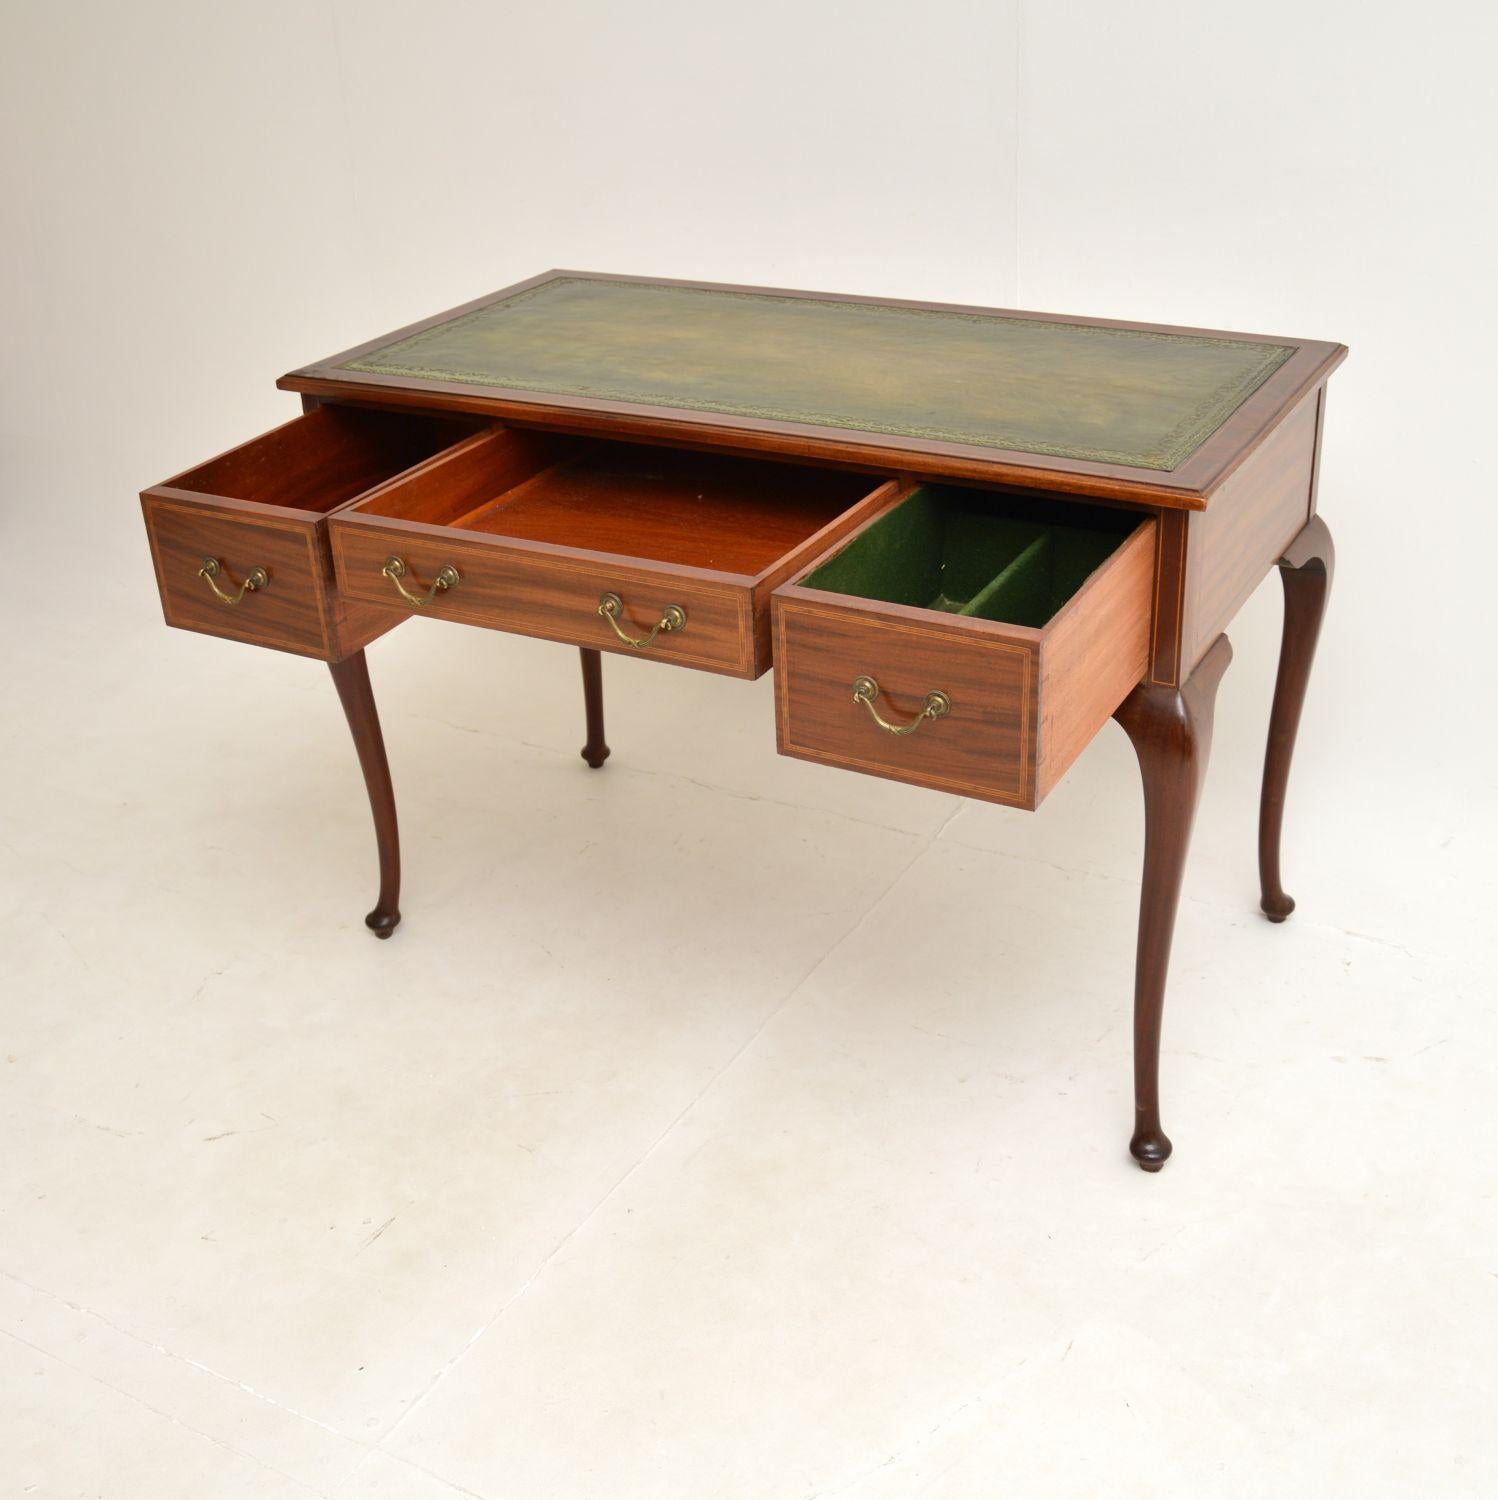 Early 20th Century Antique Edwardian Inlaid Desk by Maple & Co For Sale